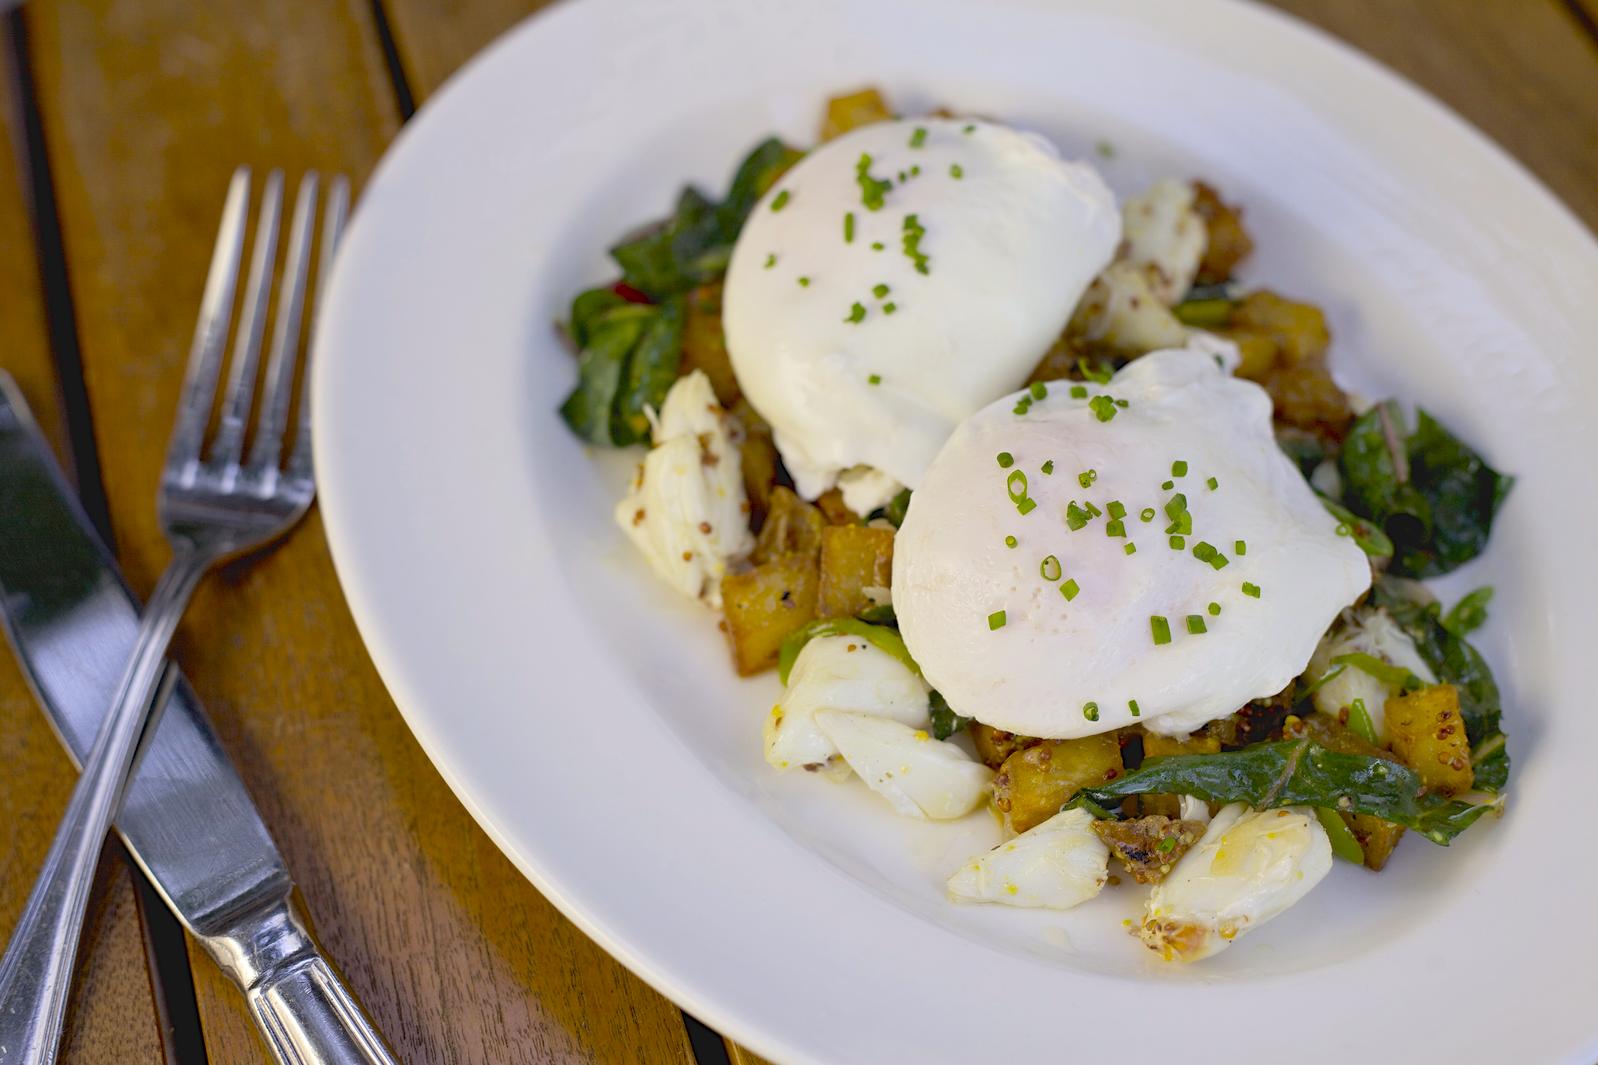  Get your morning started off right with this delicious crab hash.